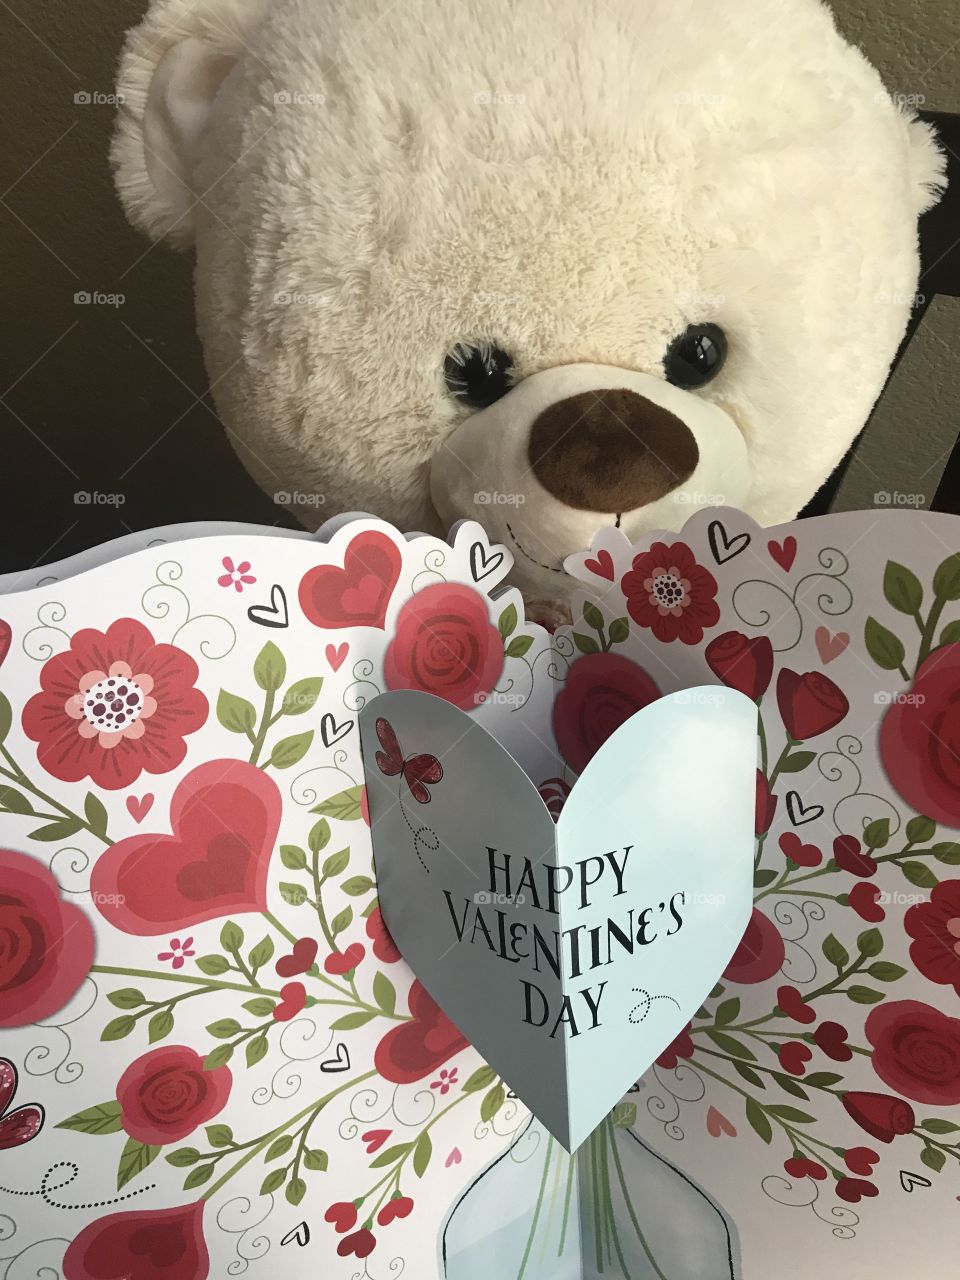 A Valentines bear holding a happy Valentine’s Day card with flowers and hearts in celebration of Valentine’s Day, USA, America